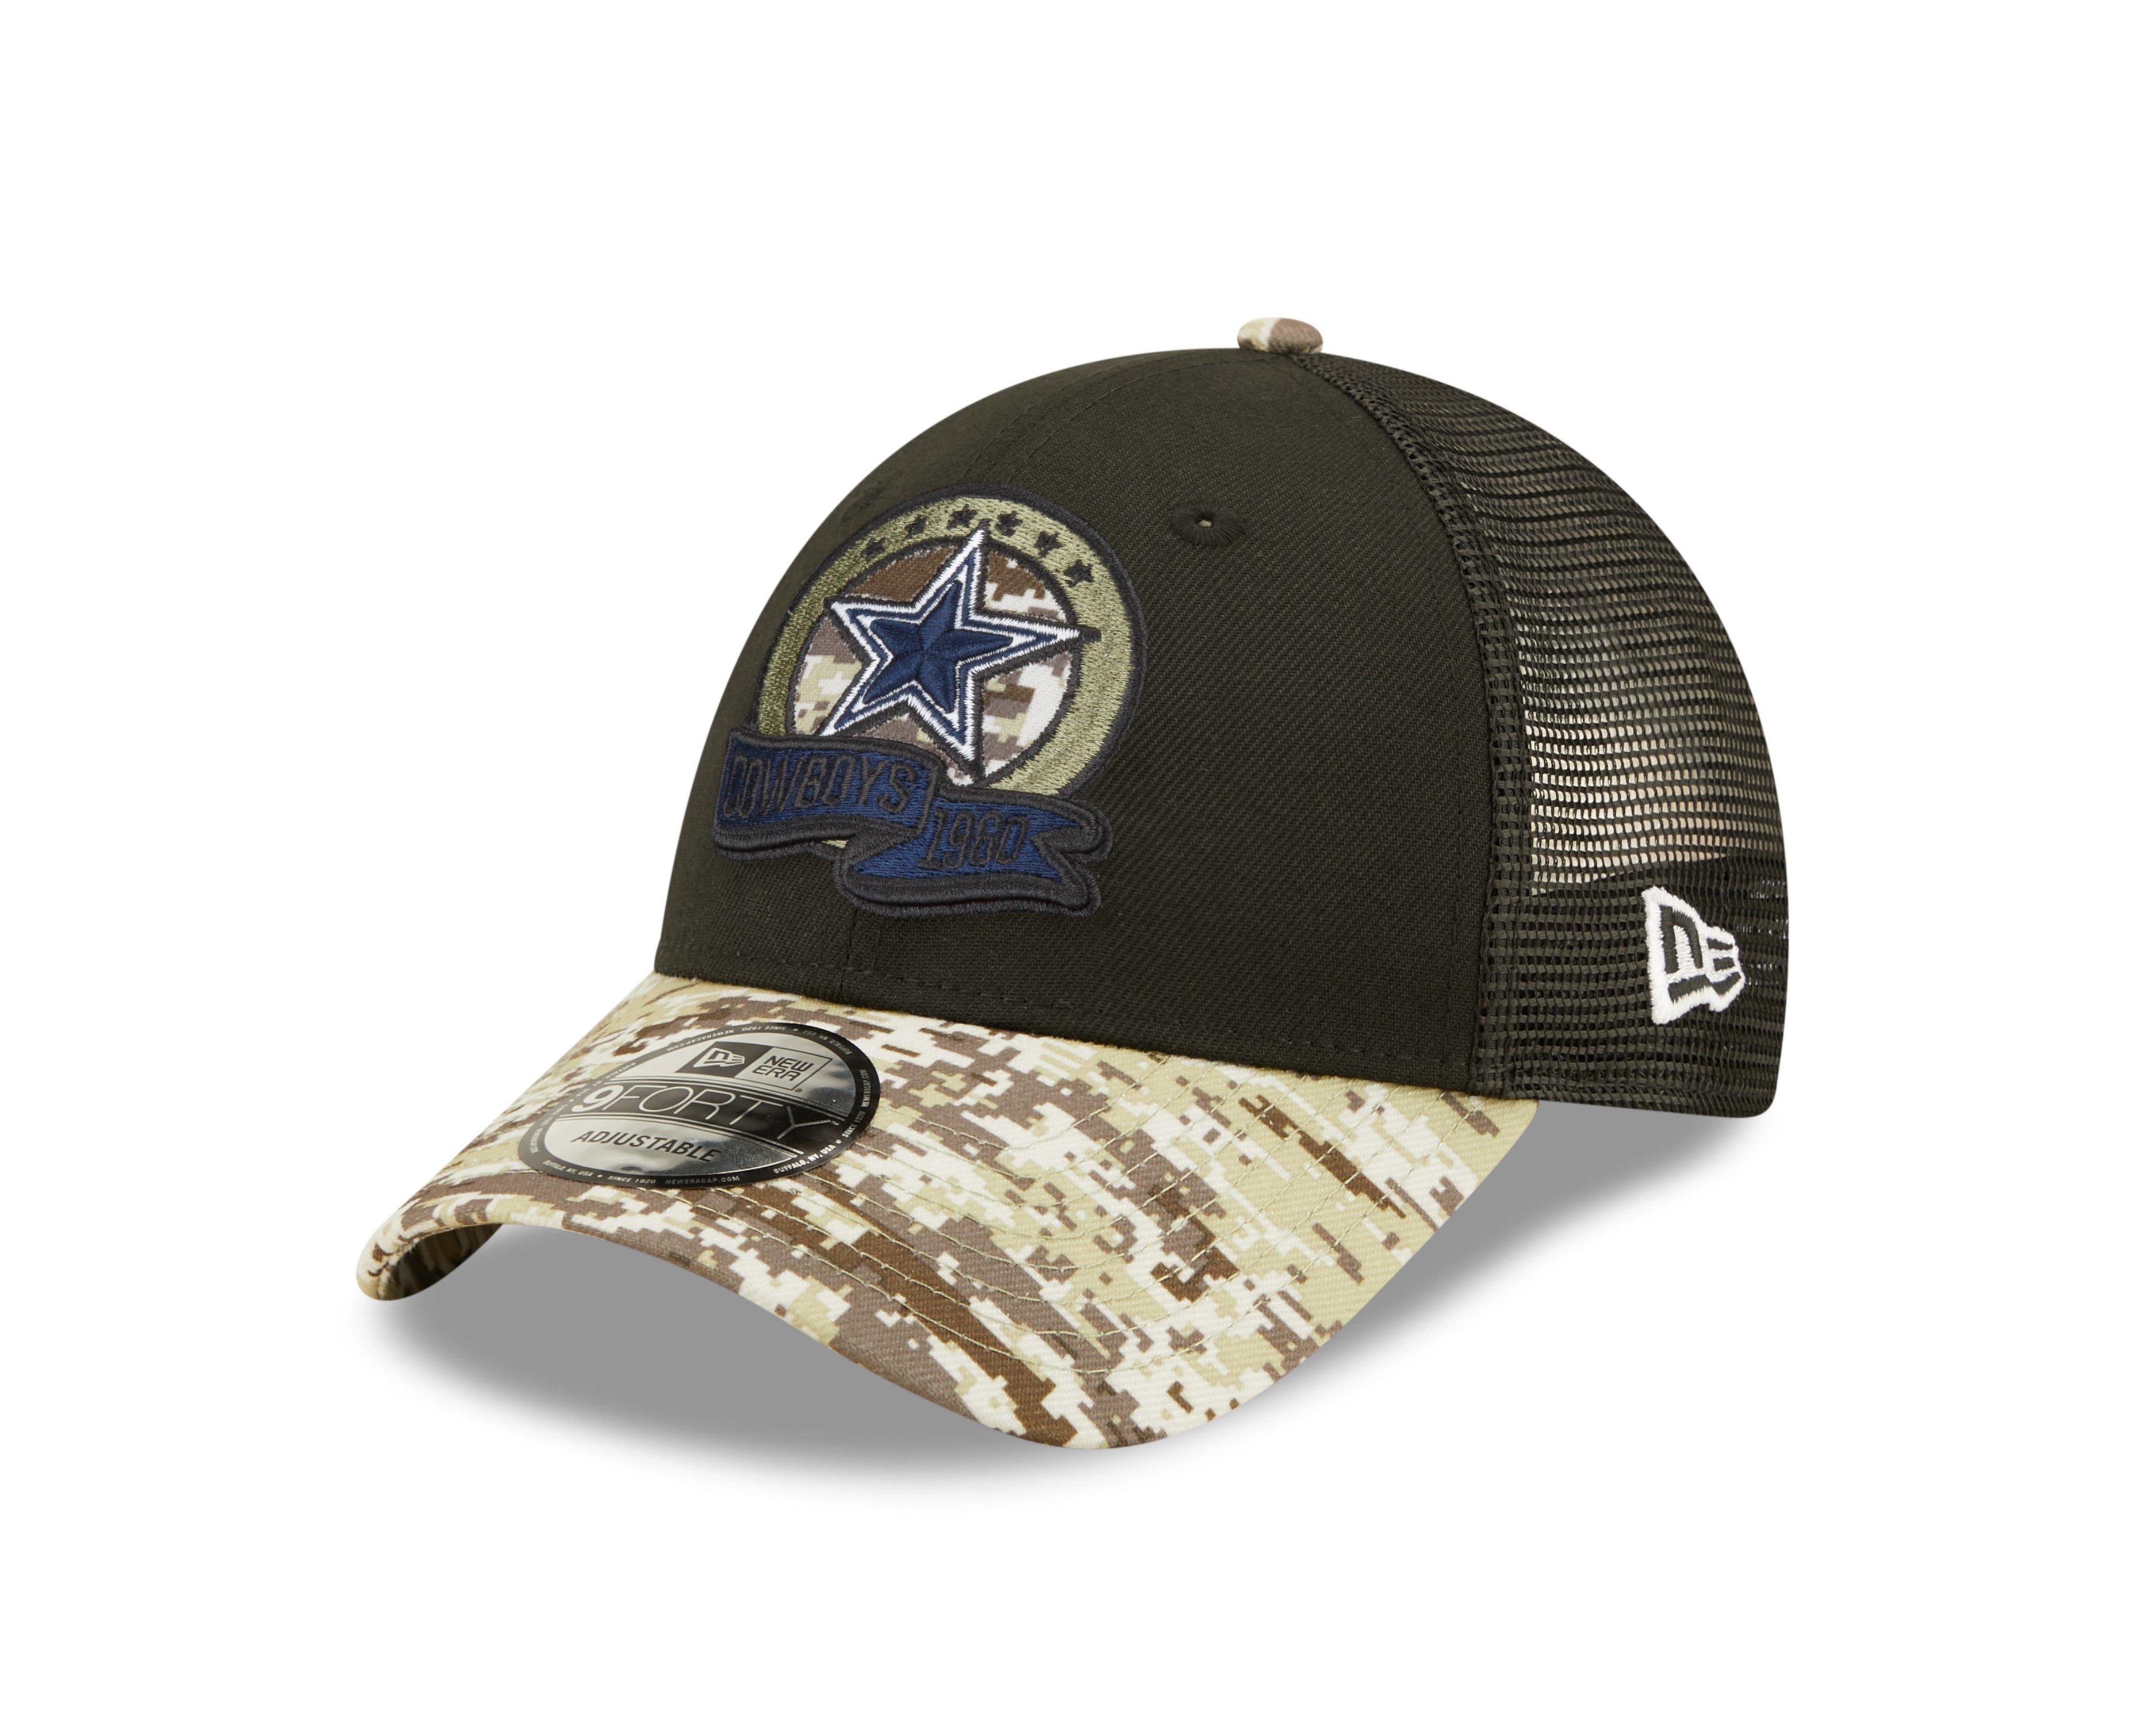 NFL Salute to Service gear: Get Buffalo Bills hats, shirts, hoodies that  help support military service members 